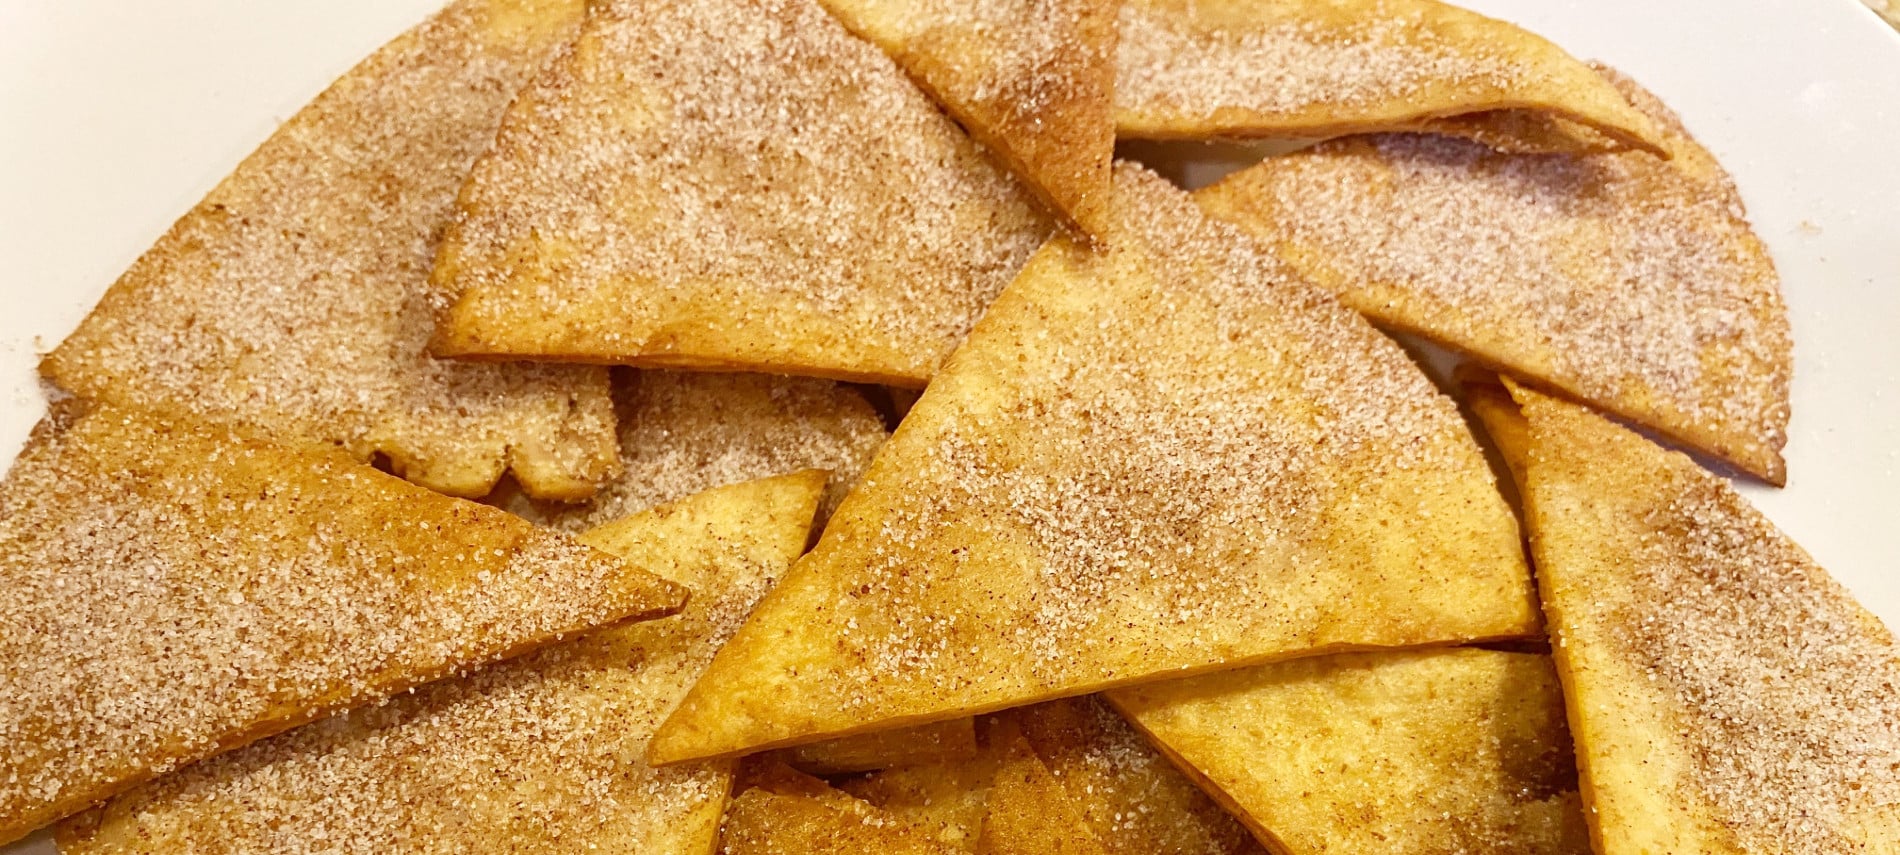 crisply fried flour tortilla wedges sprinkled with cinnamon and sugar